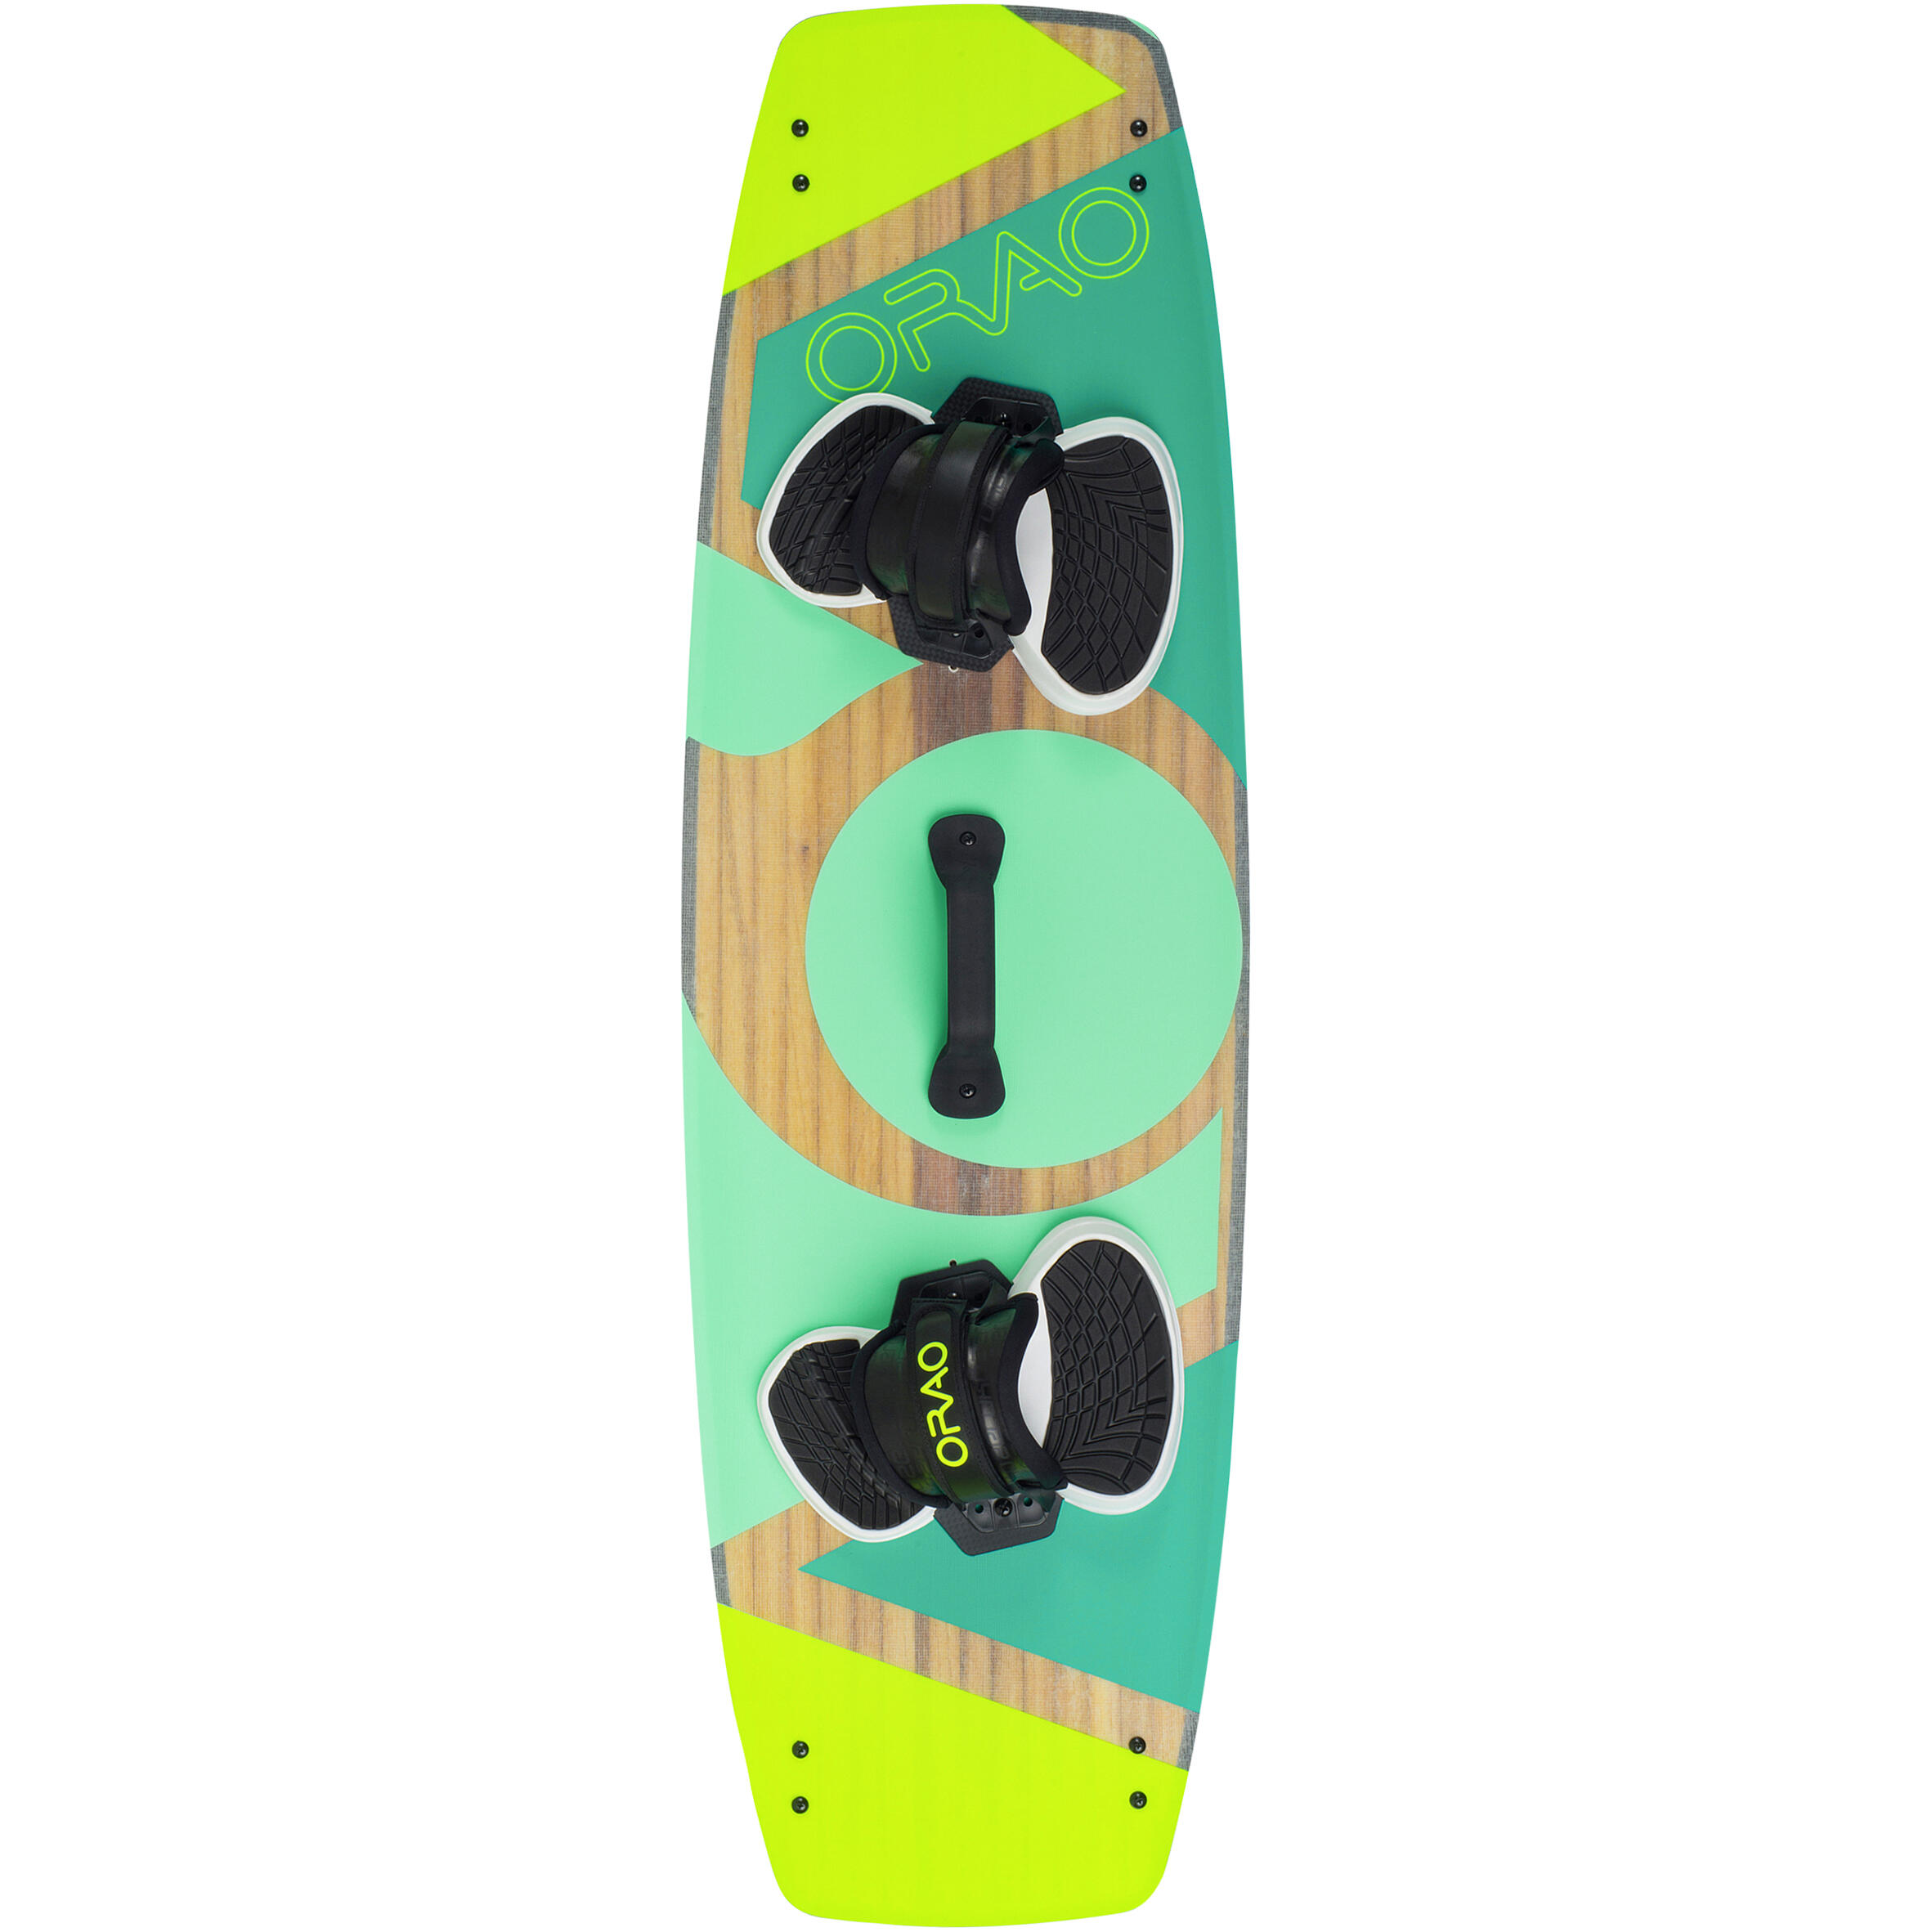 ORAO Twintip carbon kitesurf board 136 x 40.5 cm (pads and straps included) - TT500